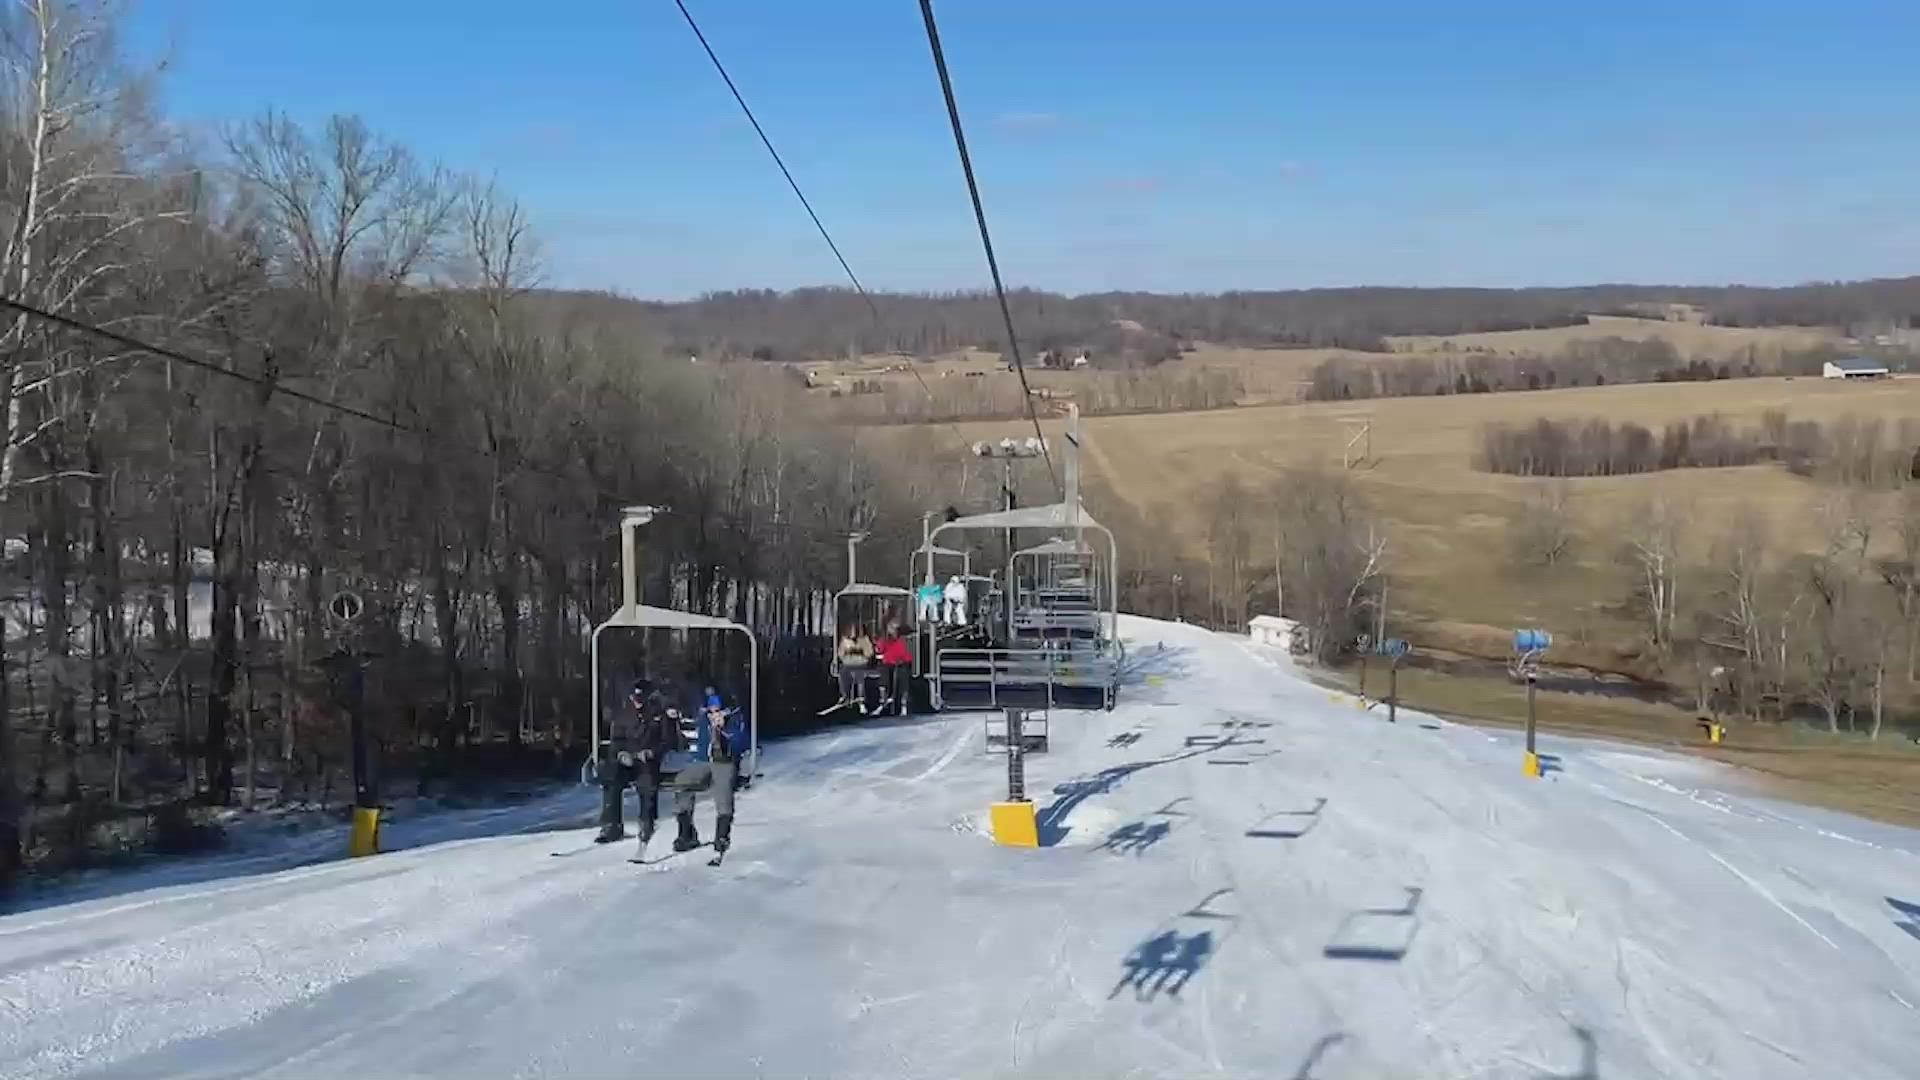 A 39-second time-lapse of going down and up the ski lift at Paoli Peaks.